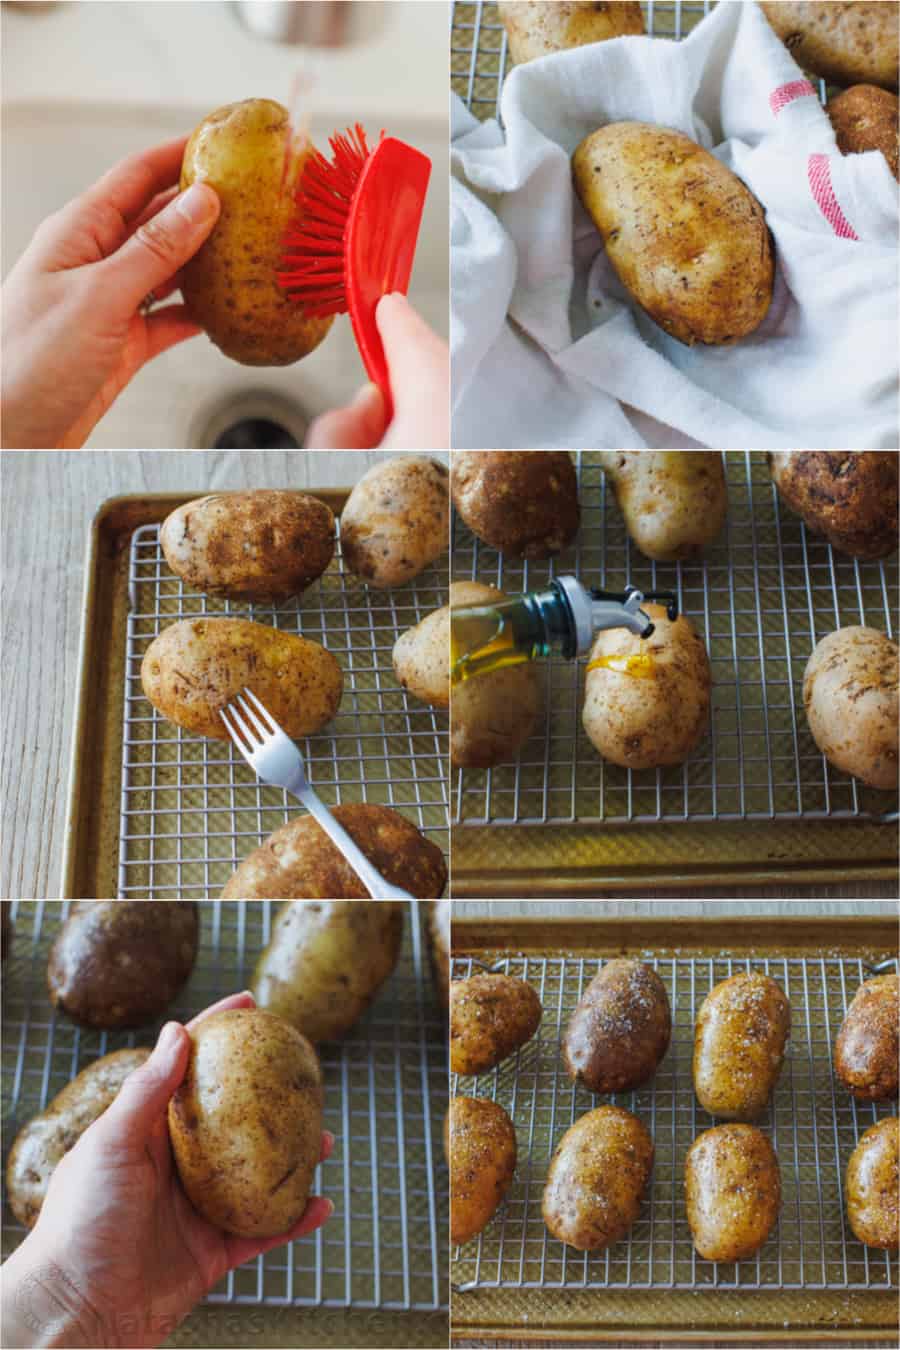 Photo collage showing how to bake a potato in the oven.